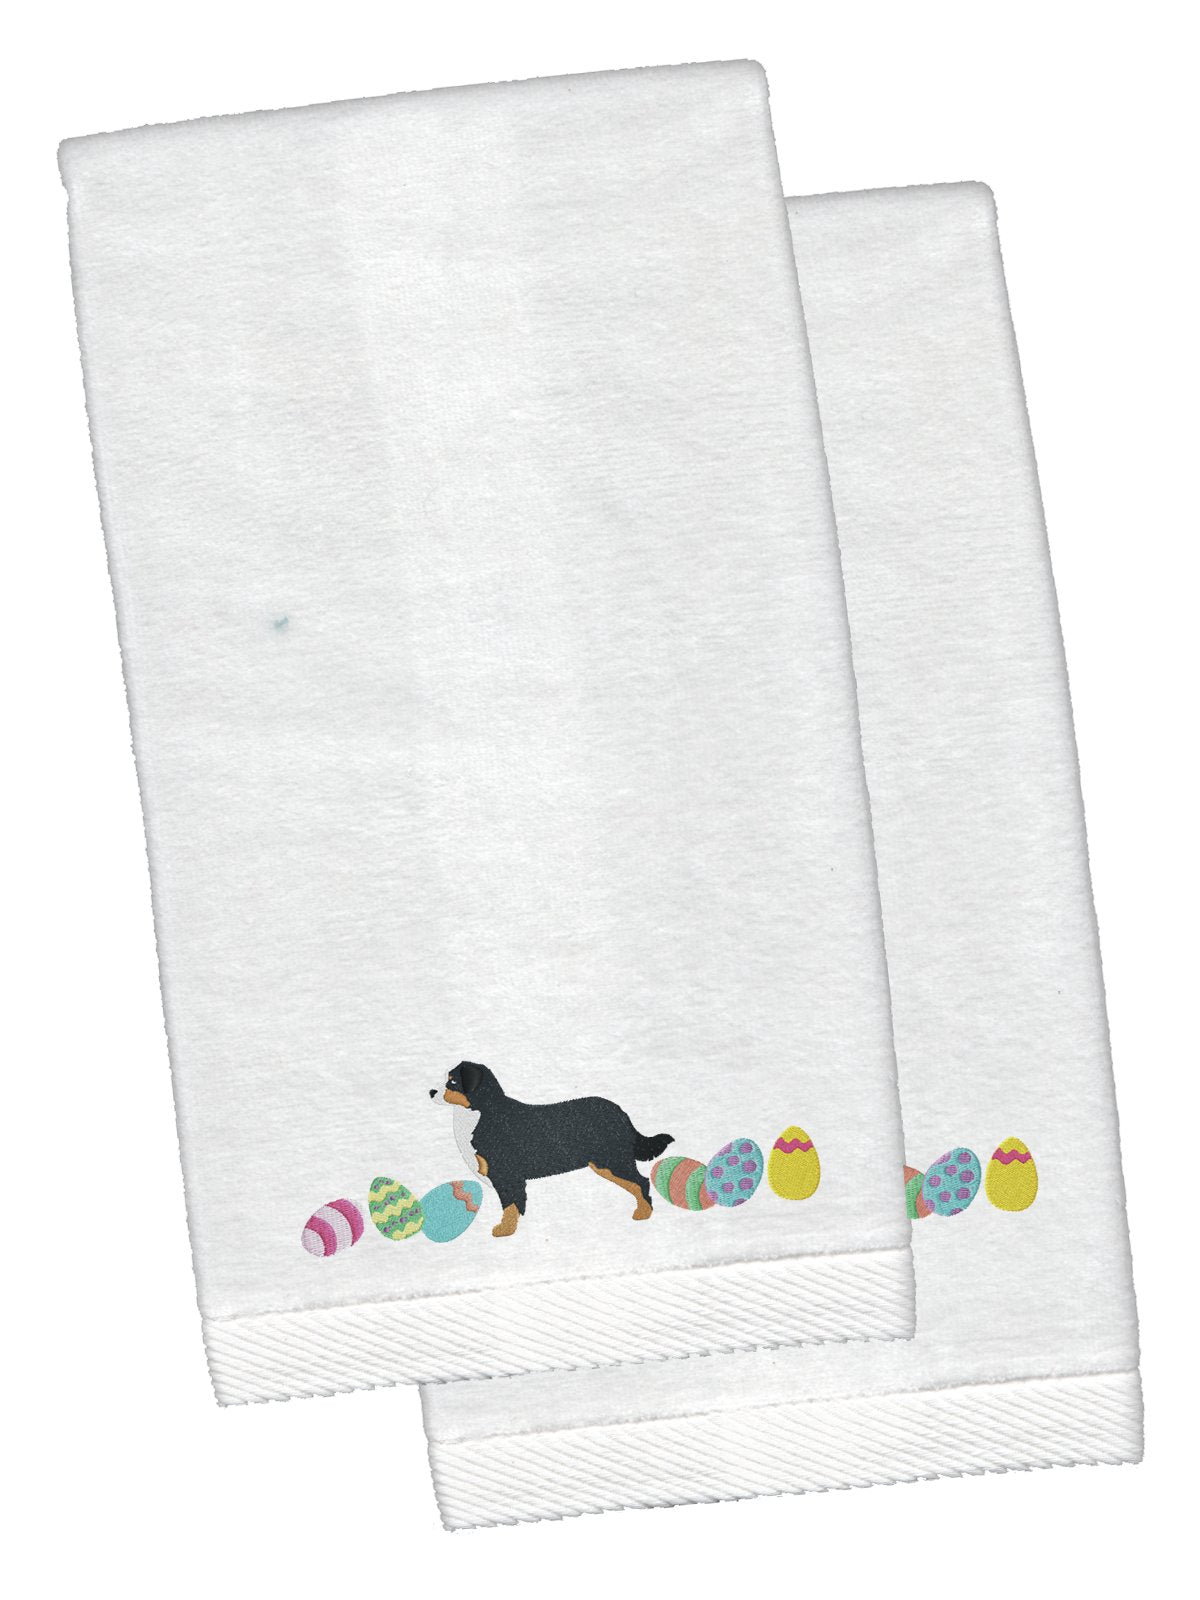 Bernese Mountain Dog Easter White Embroidered Plush Hand Towel Set of 2 CK1608KTEMB by Caroline's Treasures